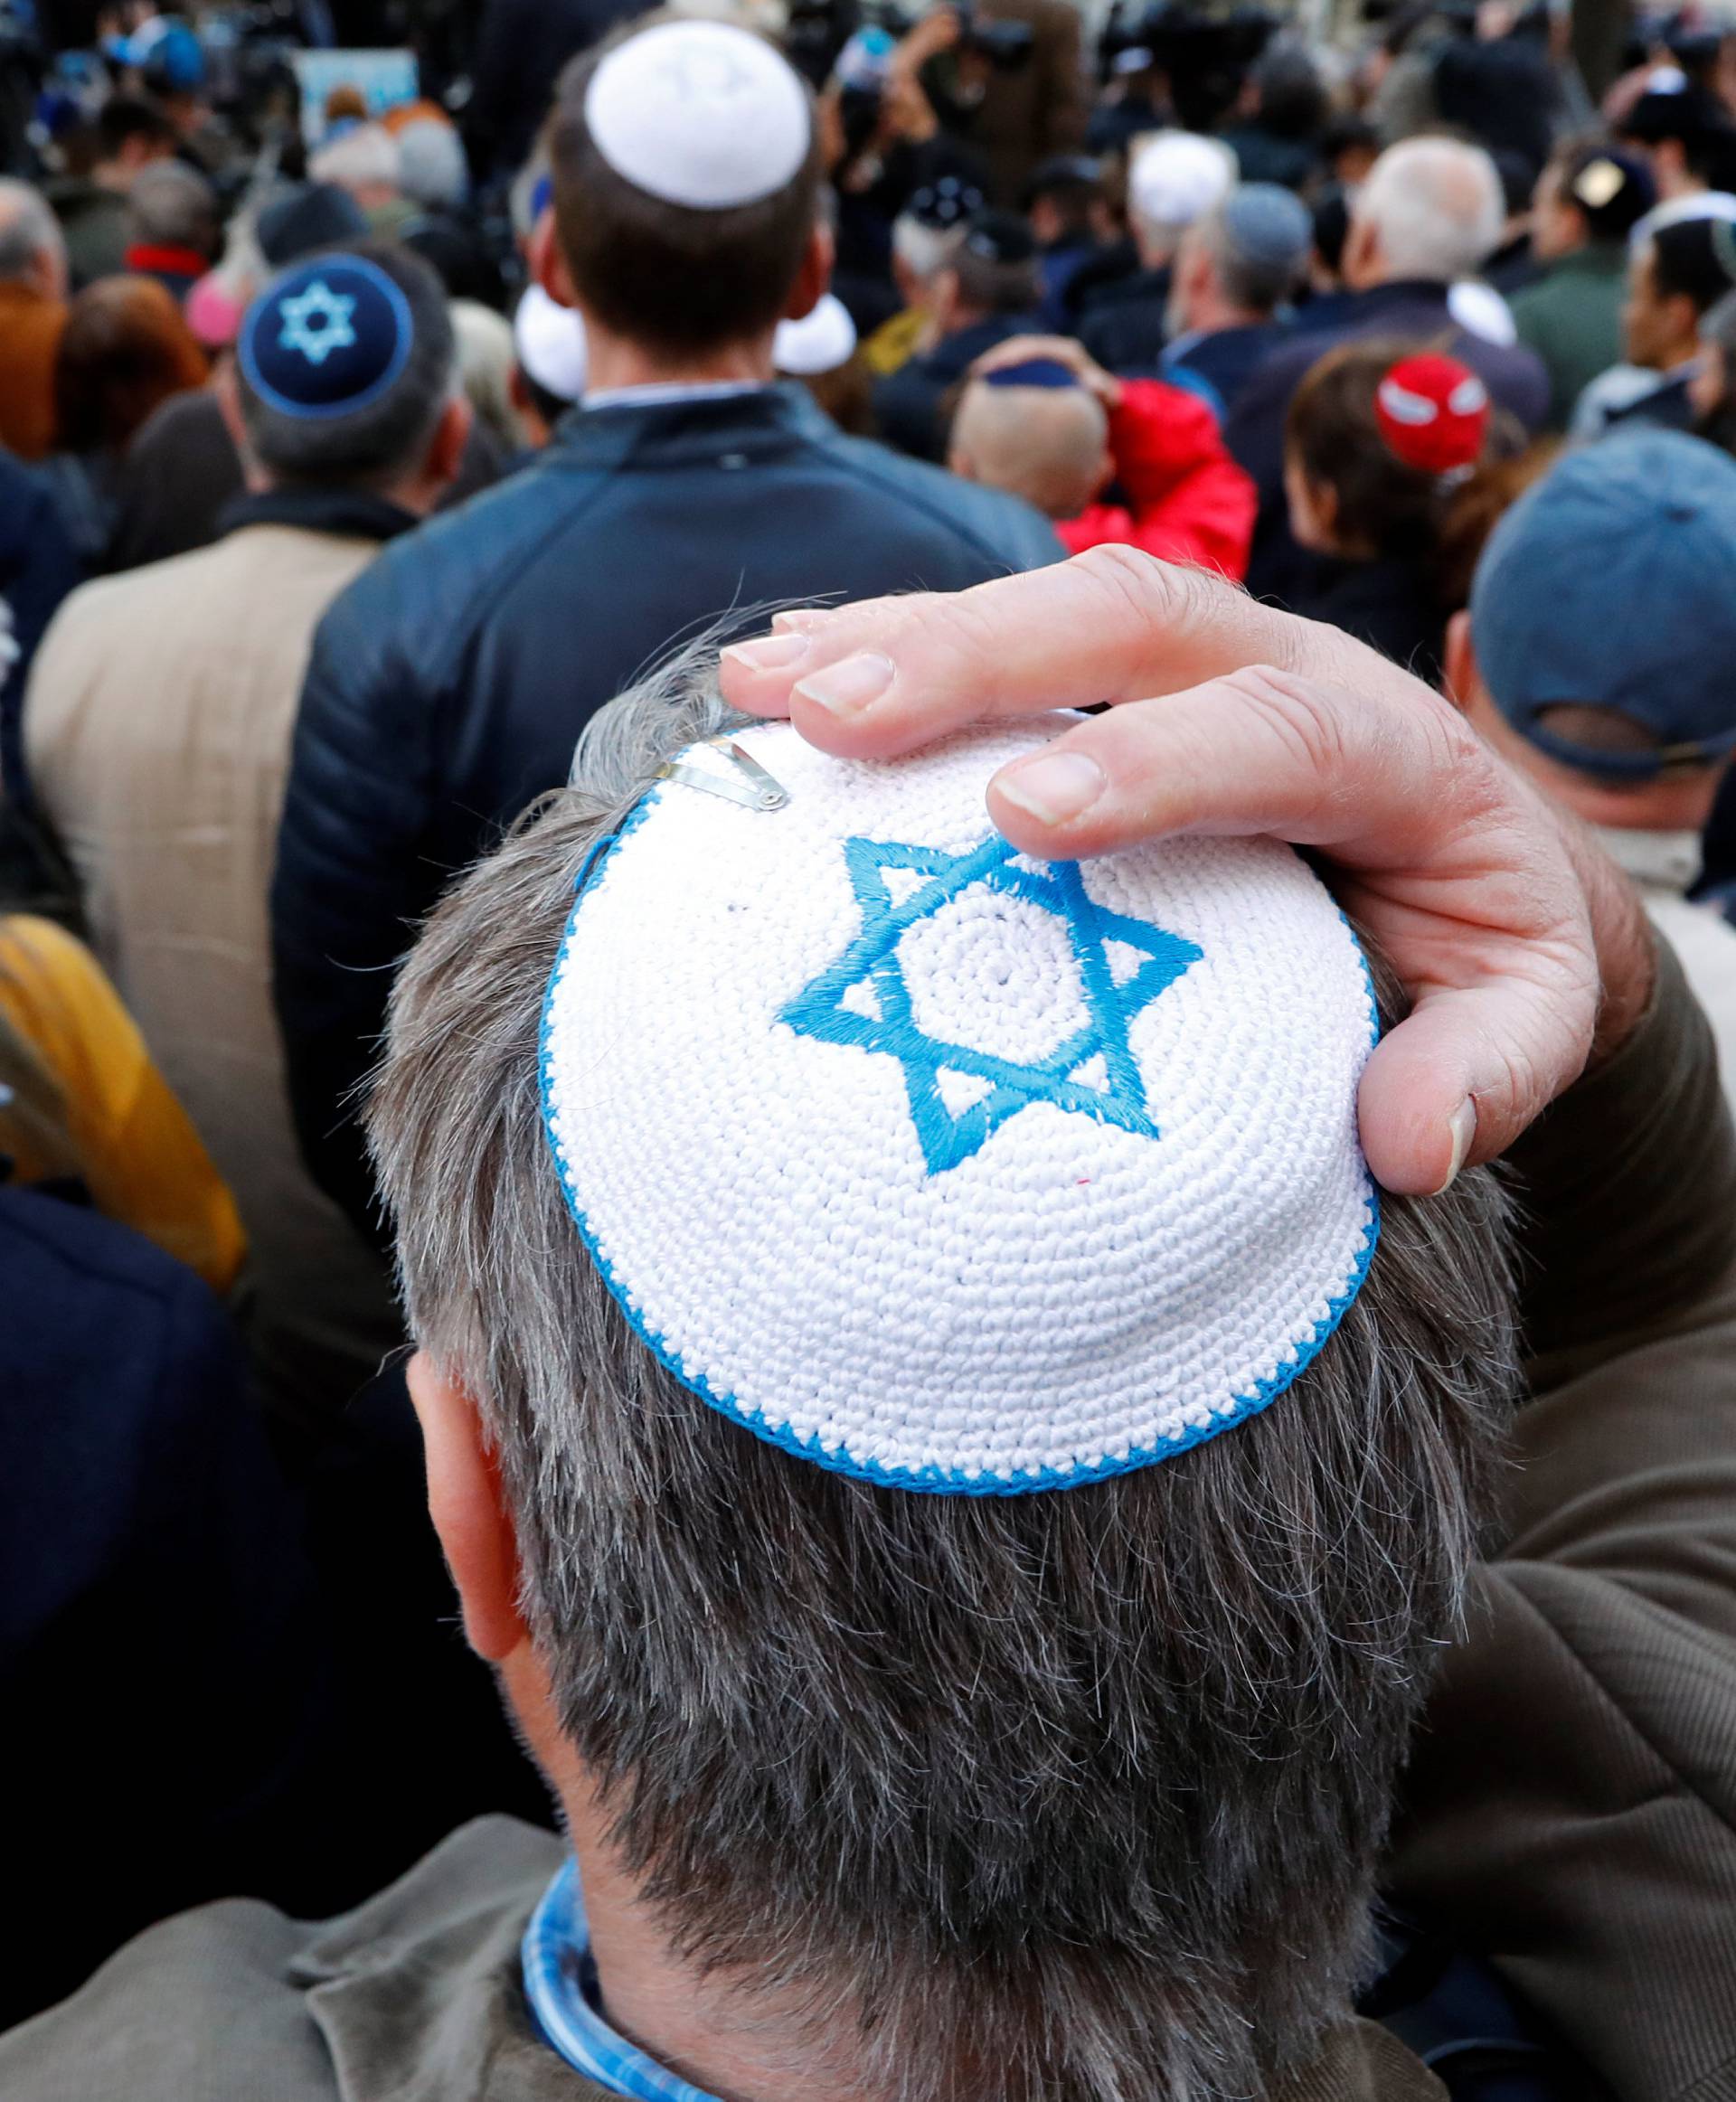 People wear kippas as they attend a demonstration in front of a Jewish synagogue in Berlin